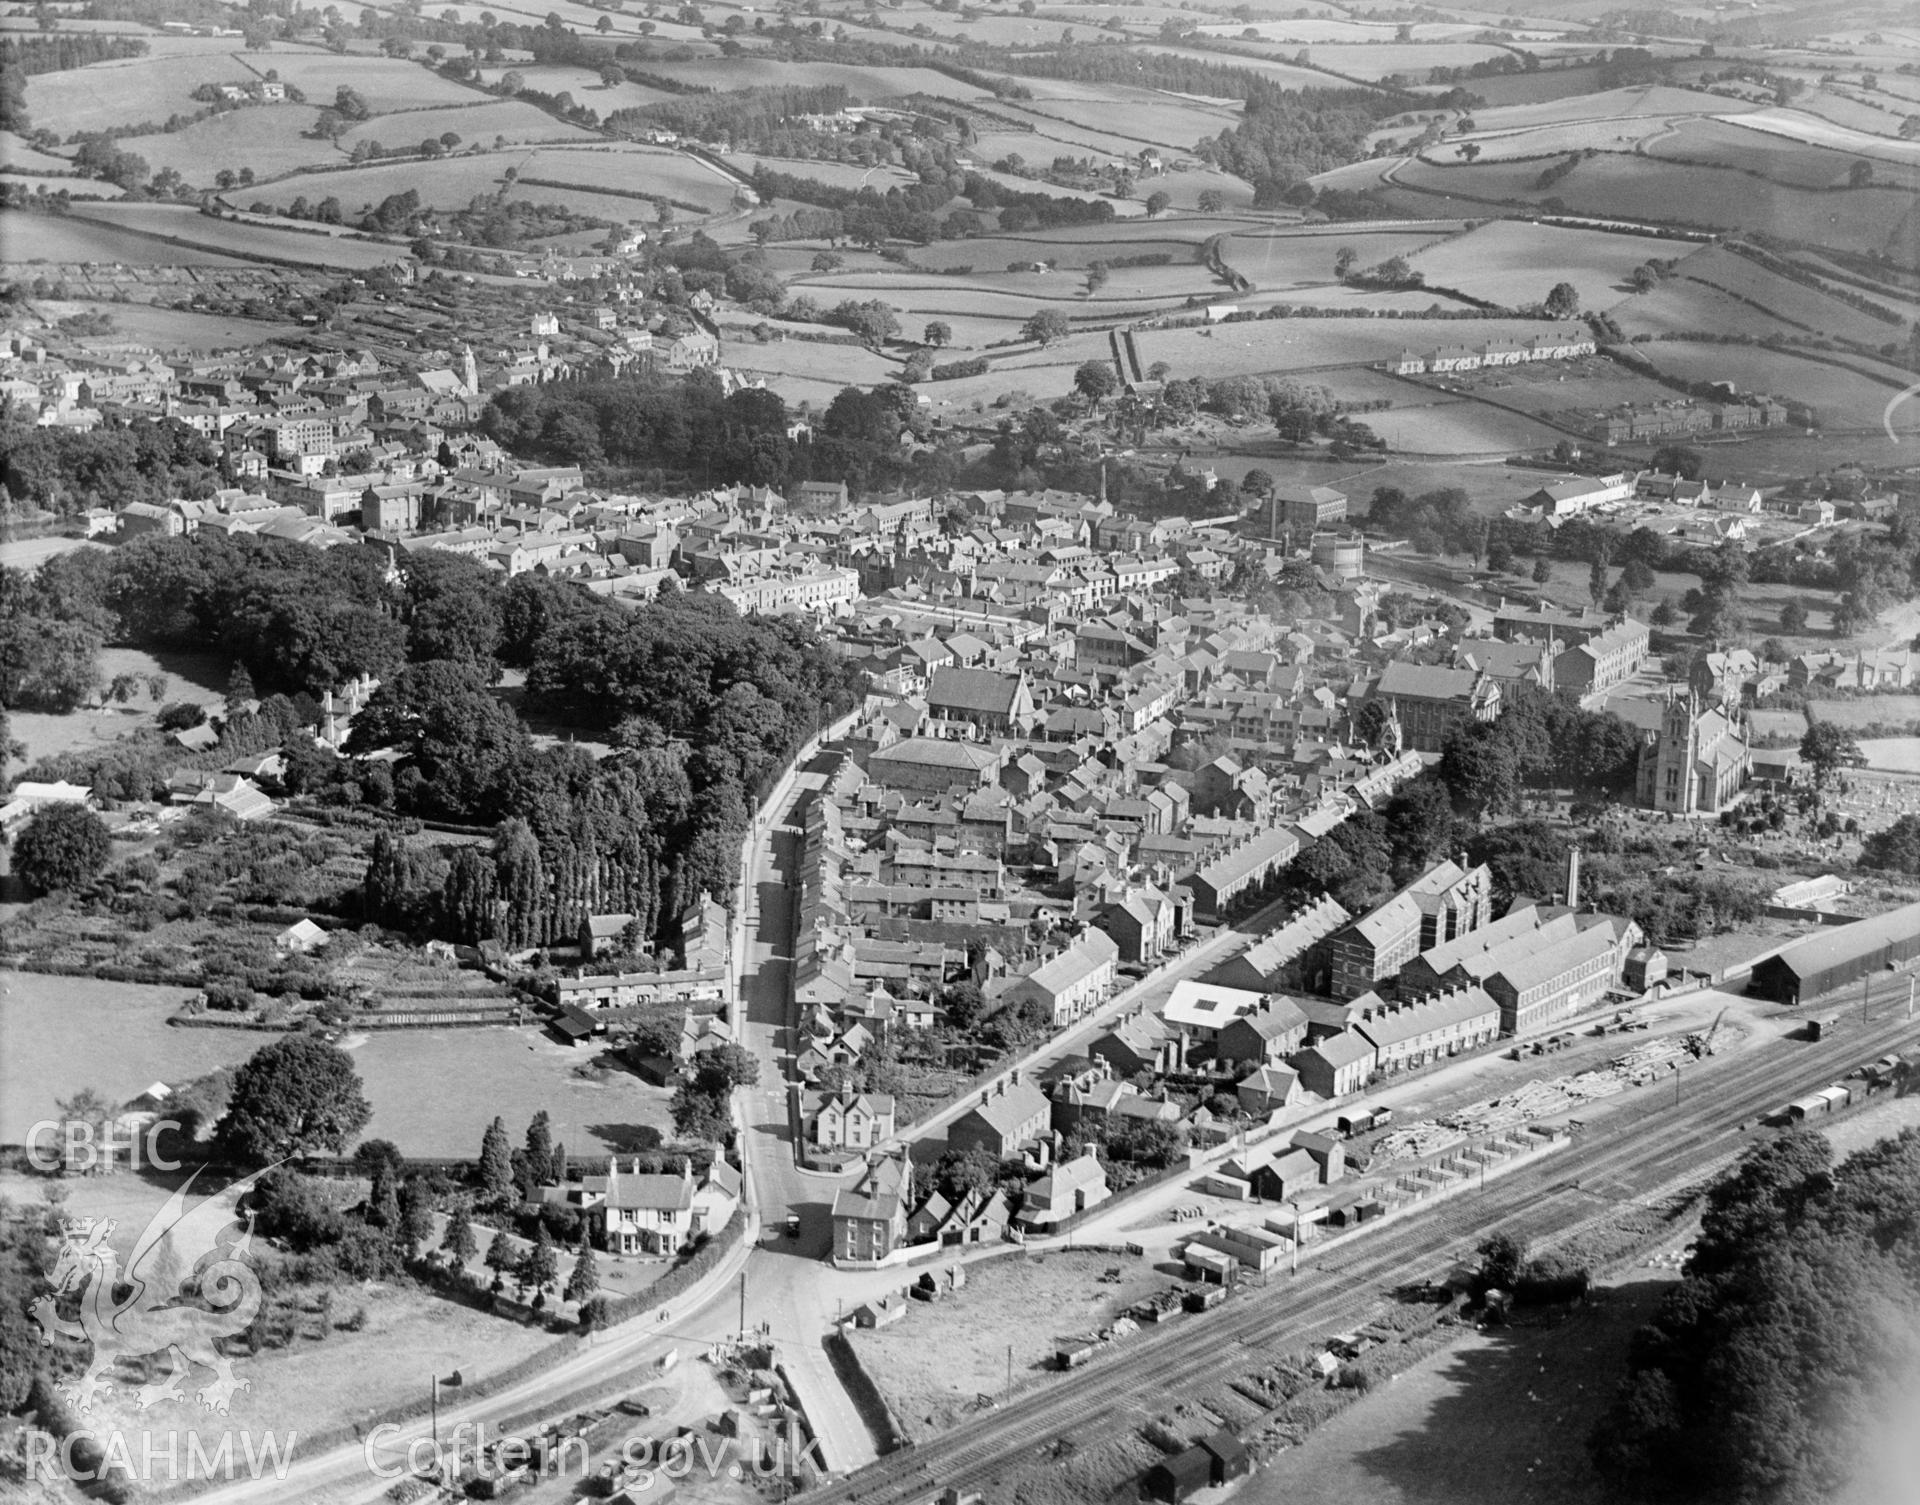 General view of Newtown, oblique aerial view. 5?x4? black and white glass plate negative.